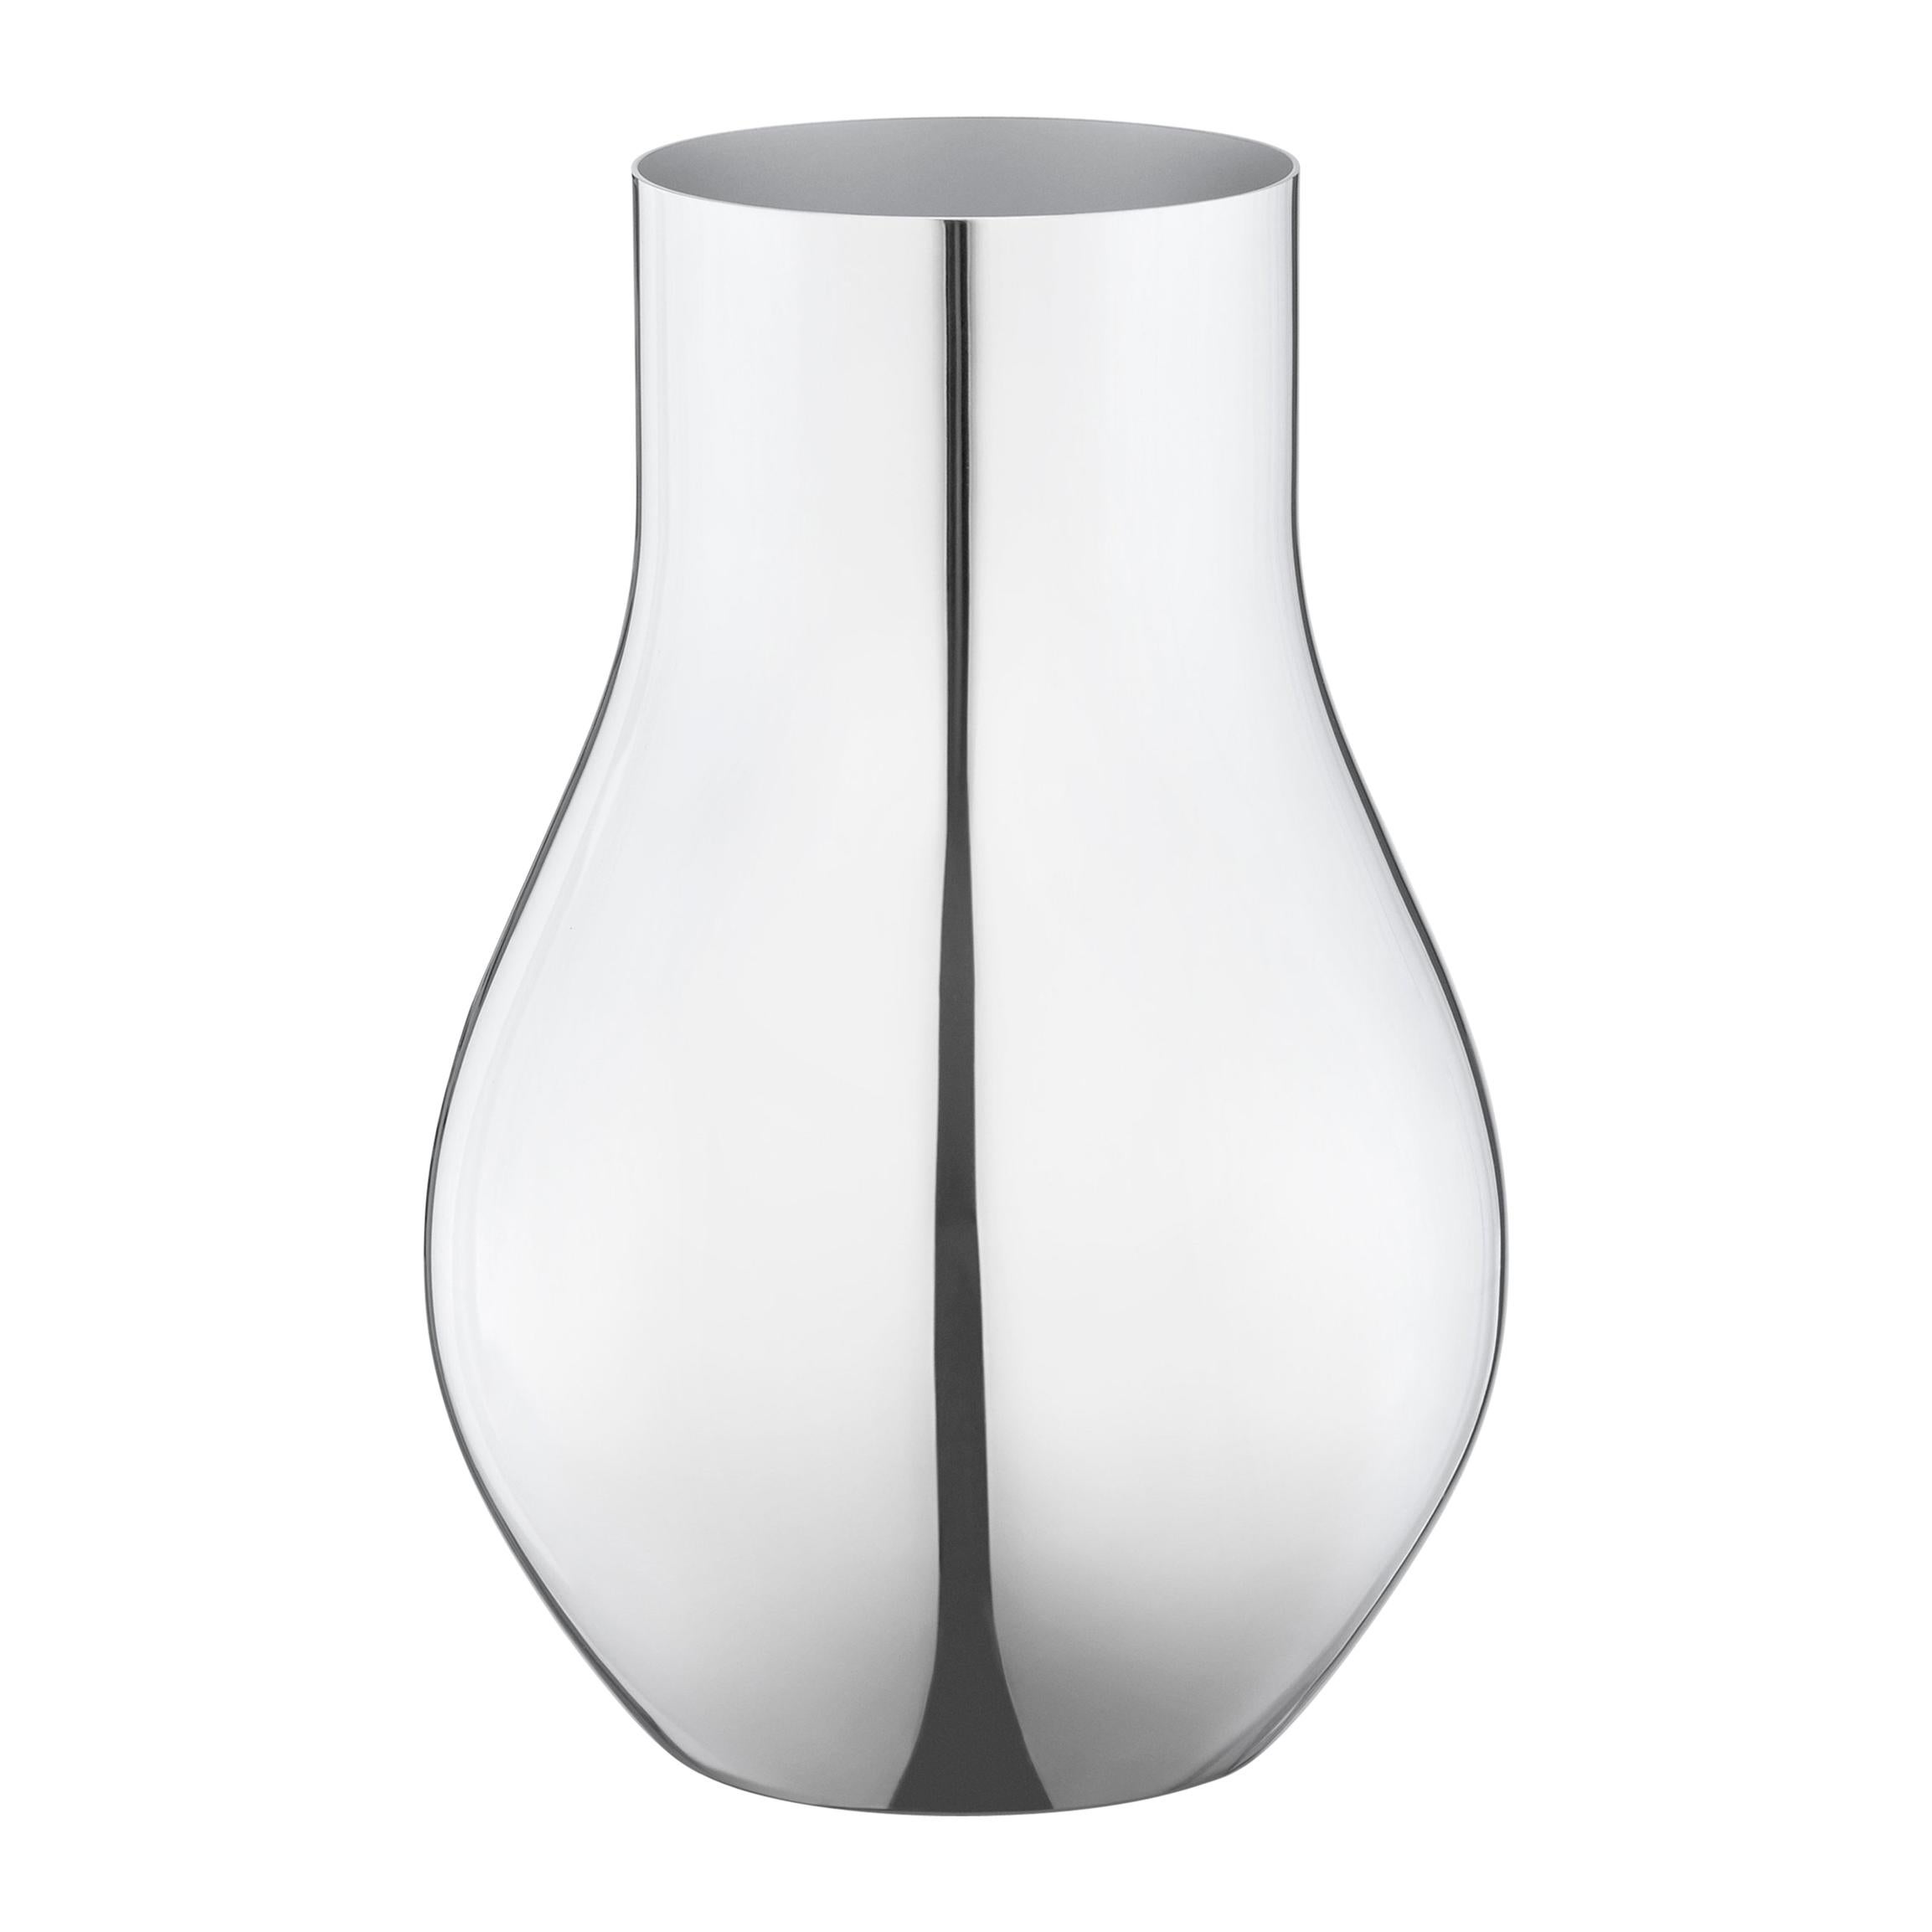 Georg Jensen Cafu Small Vase in Stainless Steel by Holmbäck Nordentoft For Sale